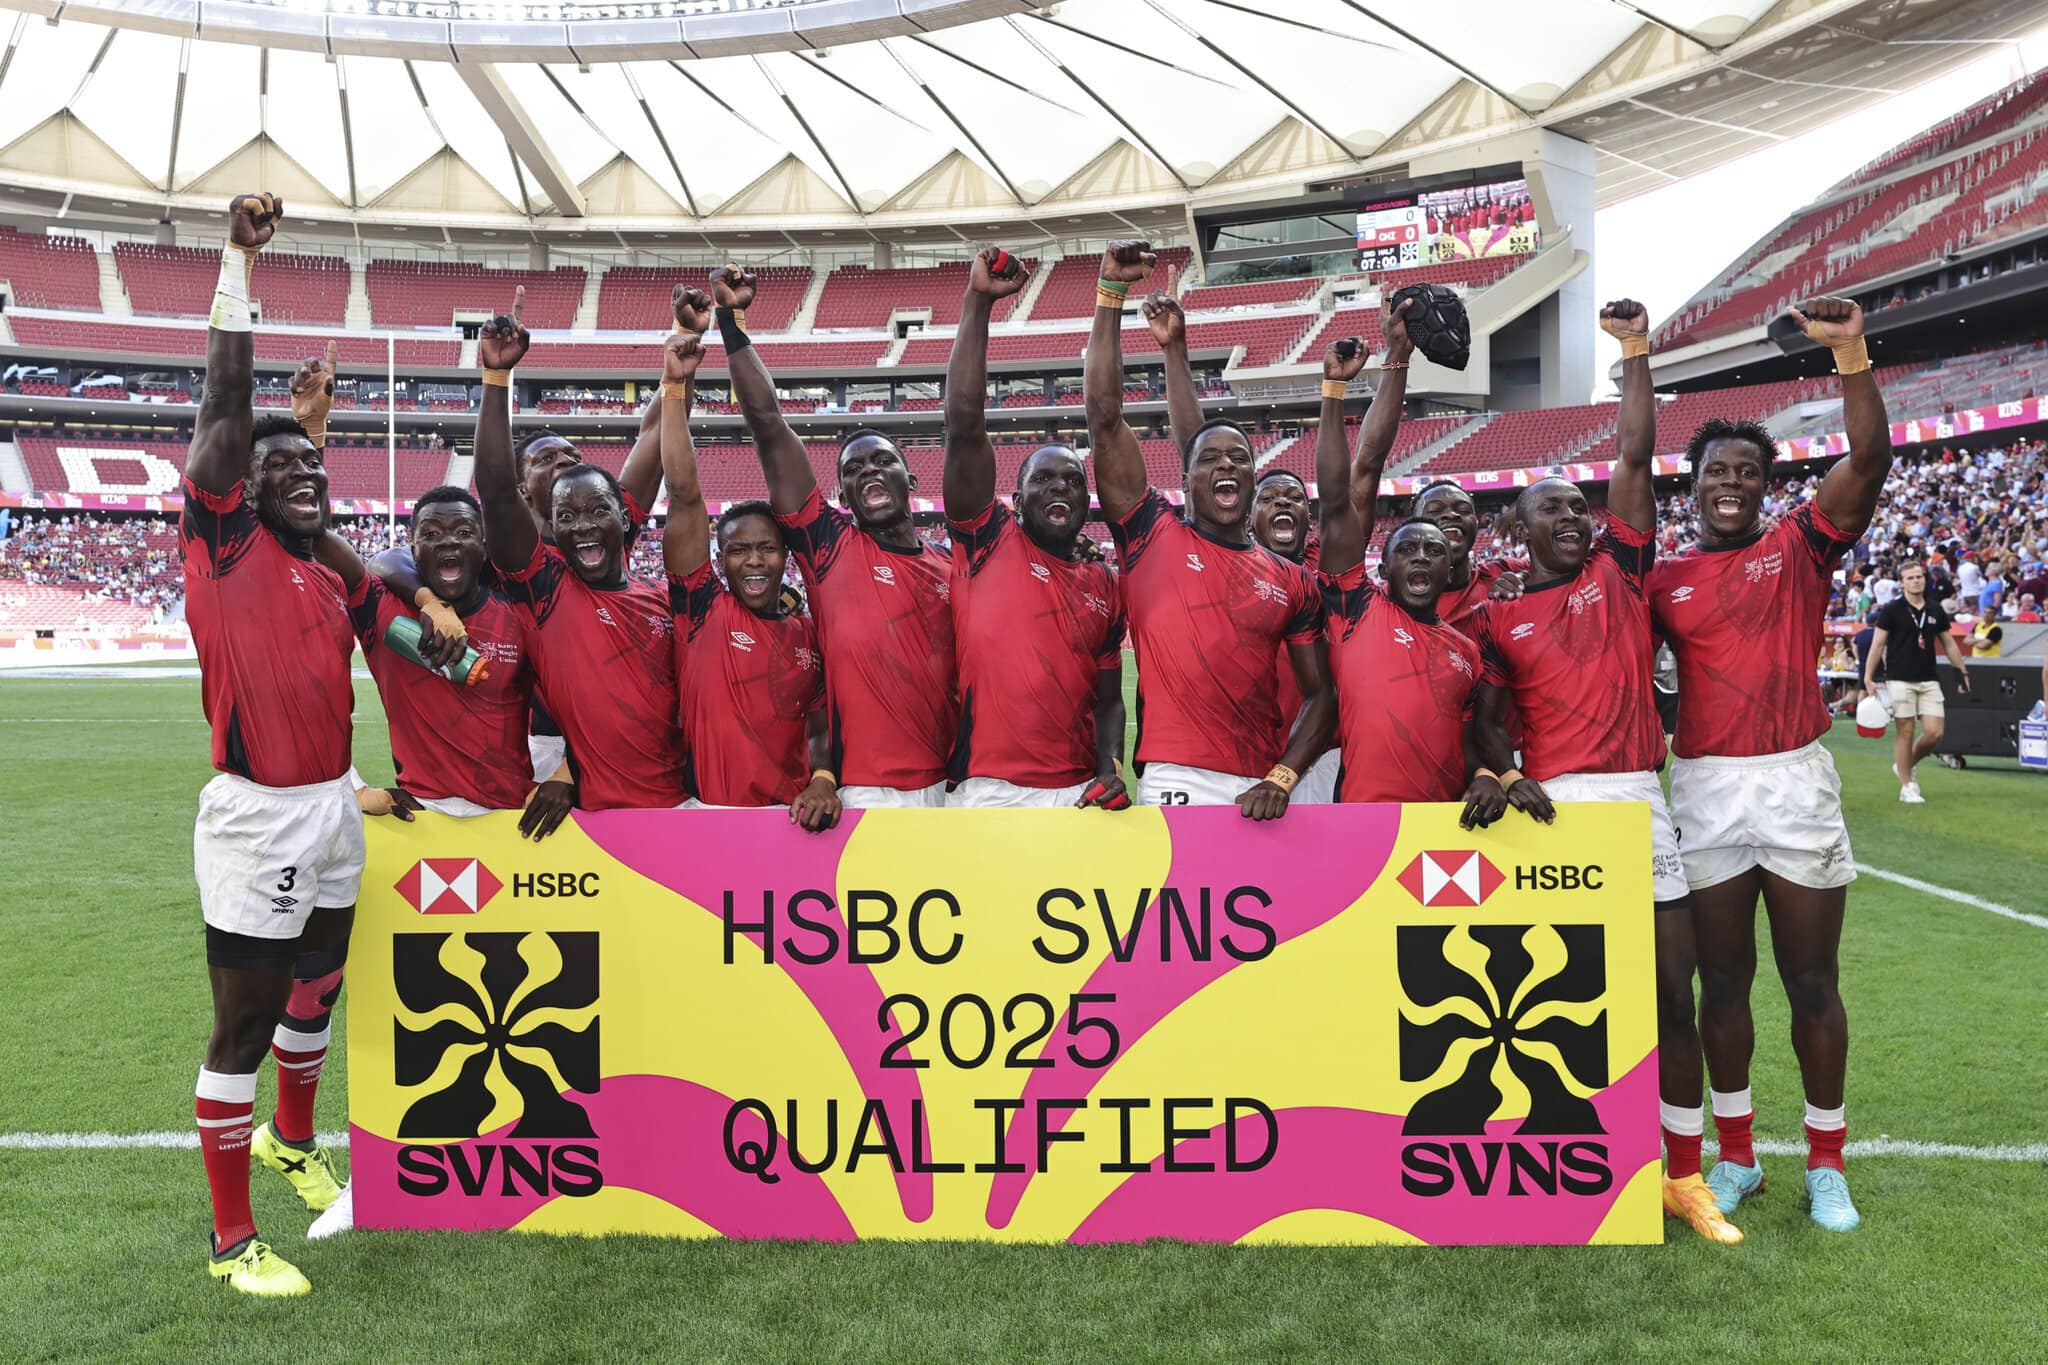 Featured image for Shujaa defeat Germany to secure HSBC SVNS return